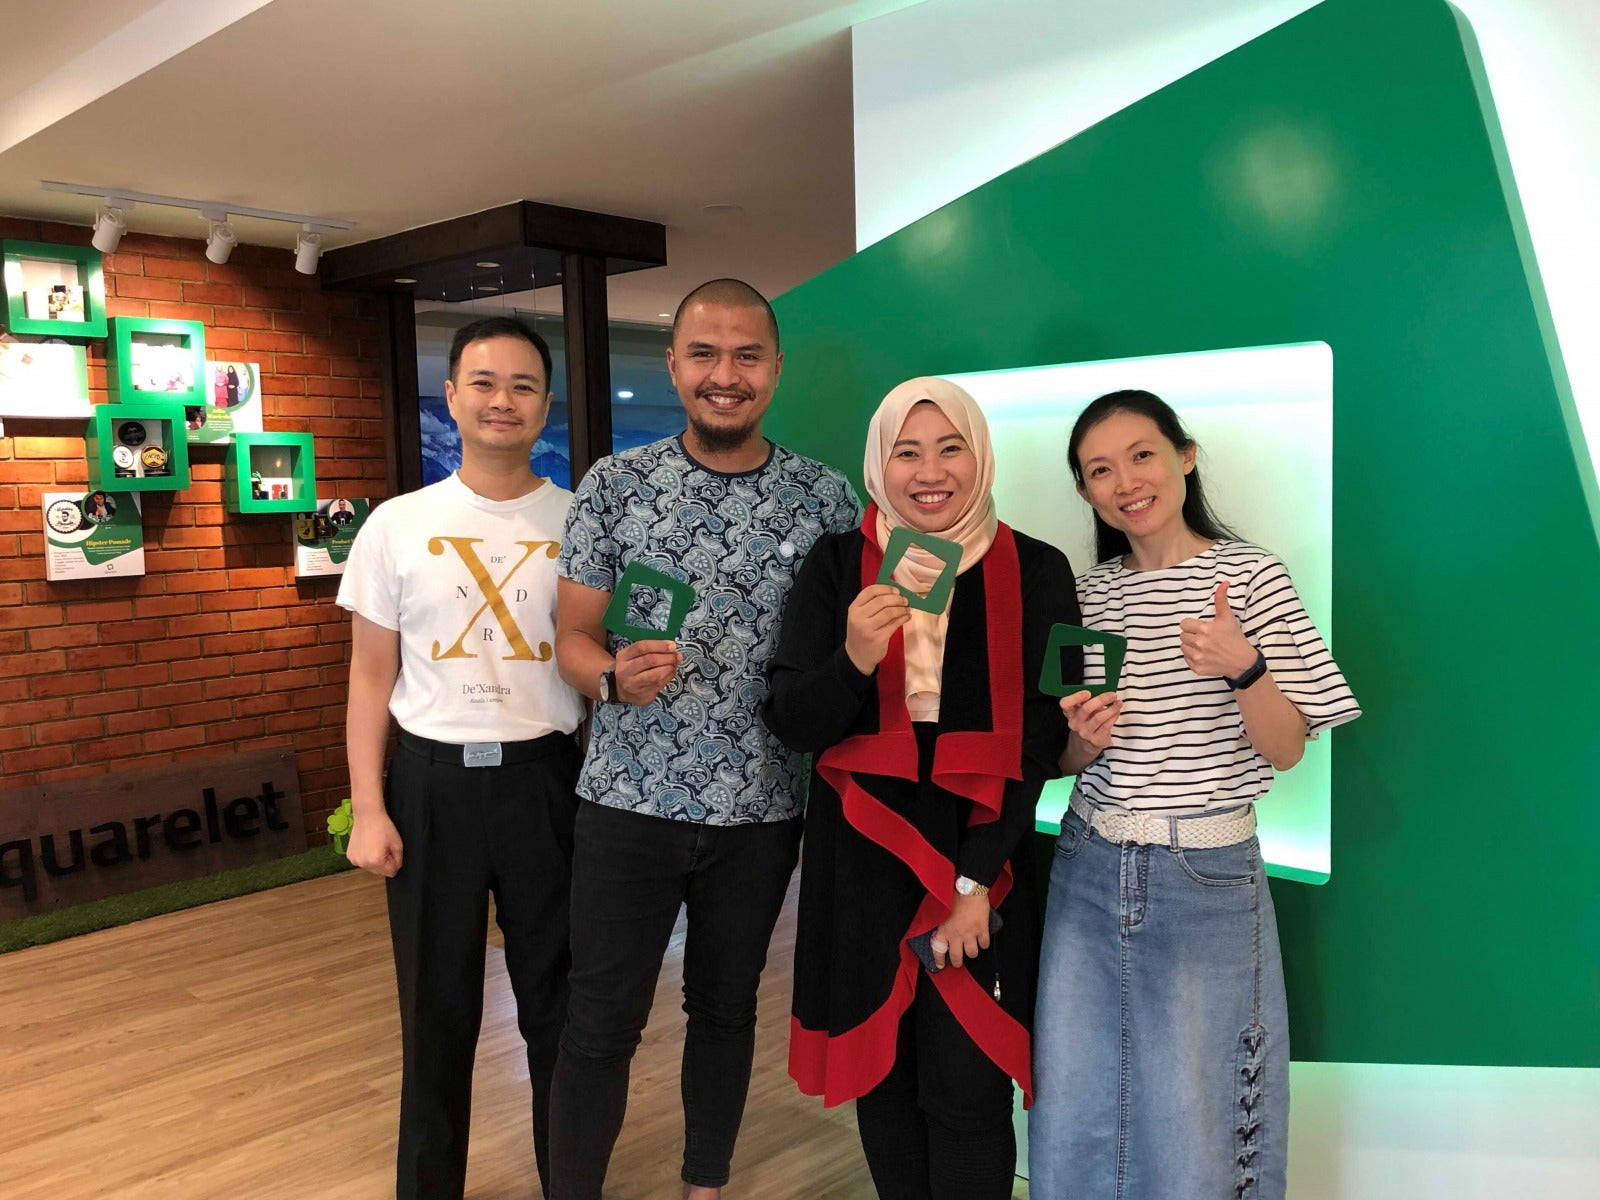 4. Squarelet Team with Founders of DeXandra